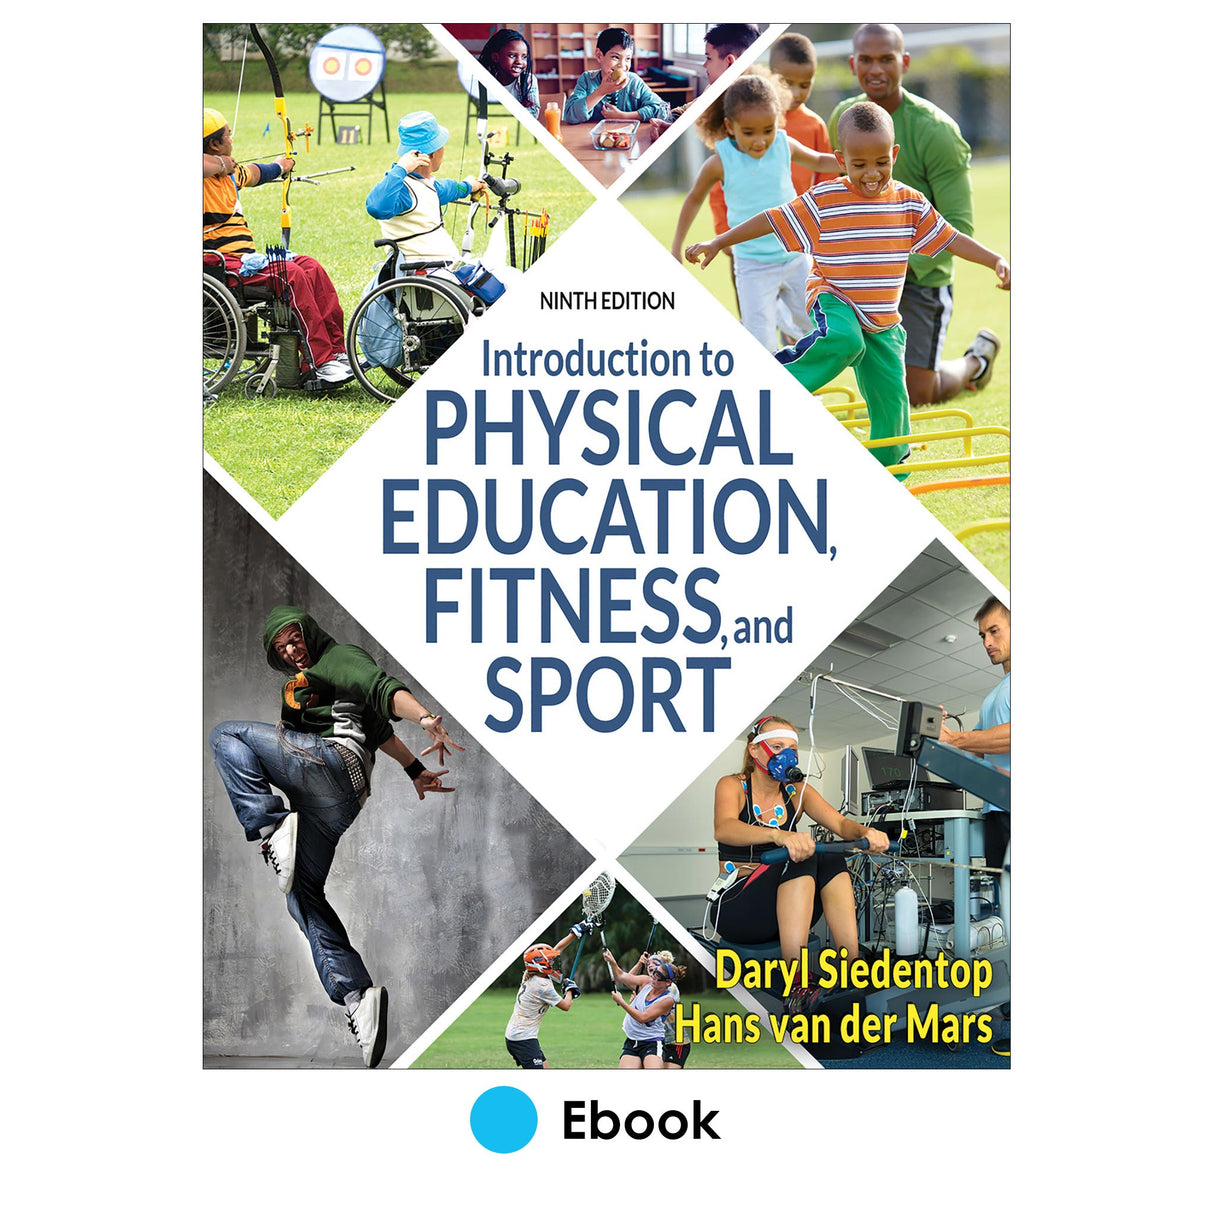 Introduction to Physical Education, Fitness, and Sport 9th Edition epub